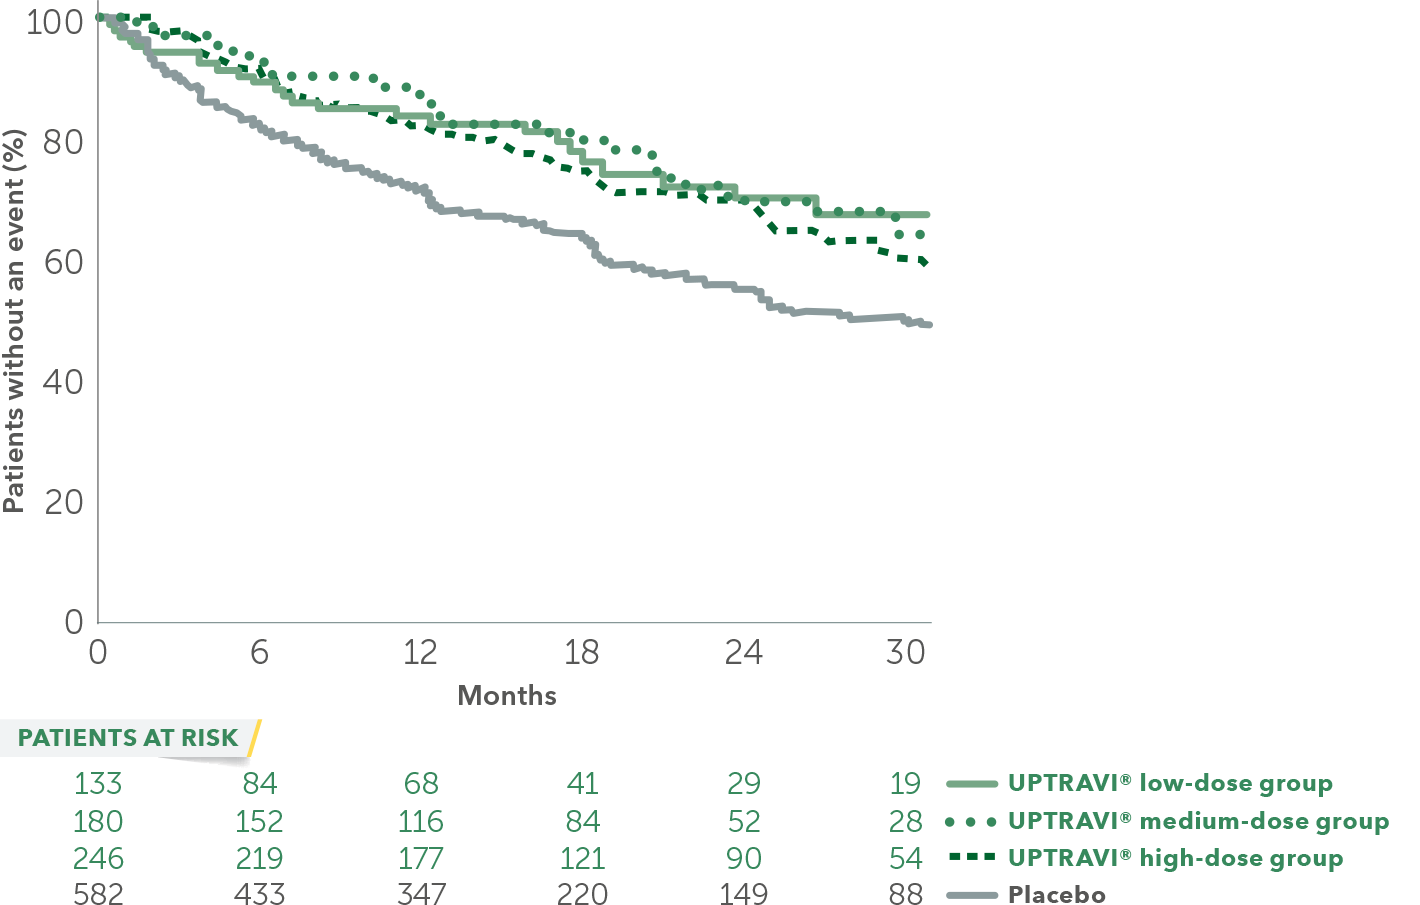 Percent of patients without an event across UPTRAVI® low-dose, medium-dose, high-dose, and placebo groups desktop curve